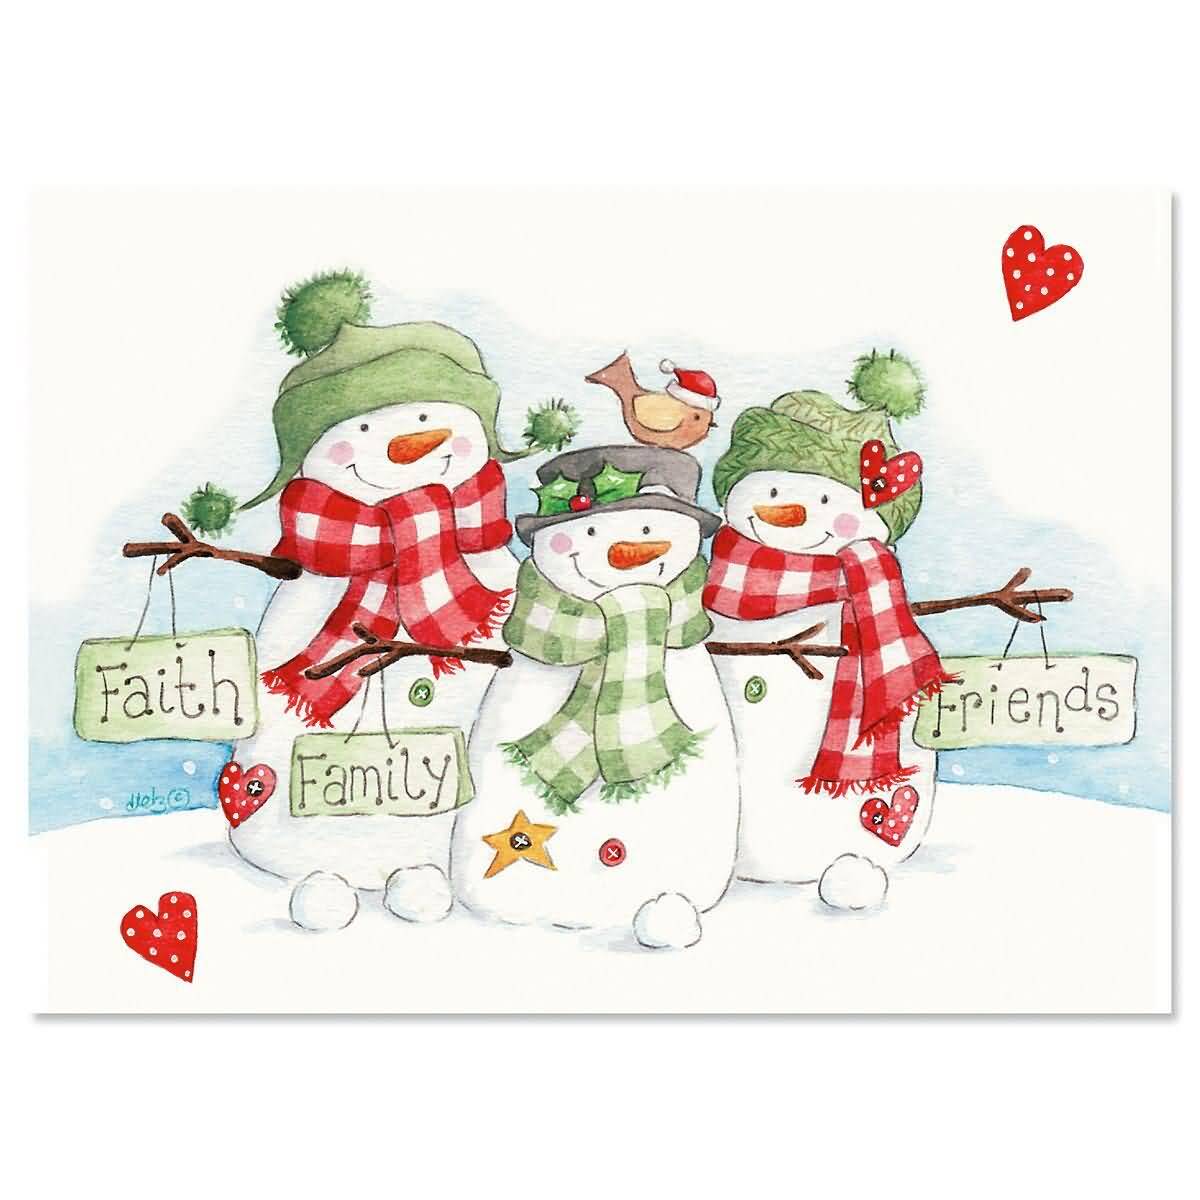 Christmas Cards Image Picture Photo Wallpaper 12